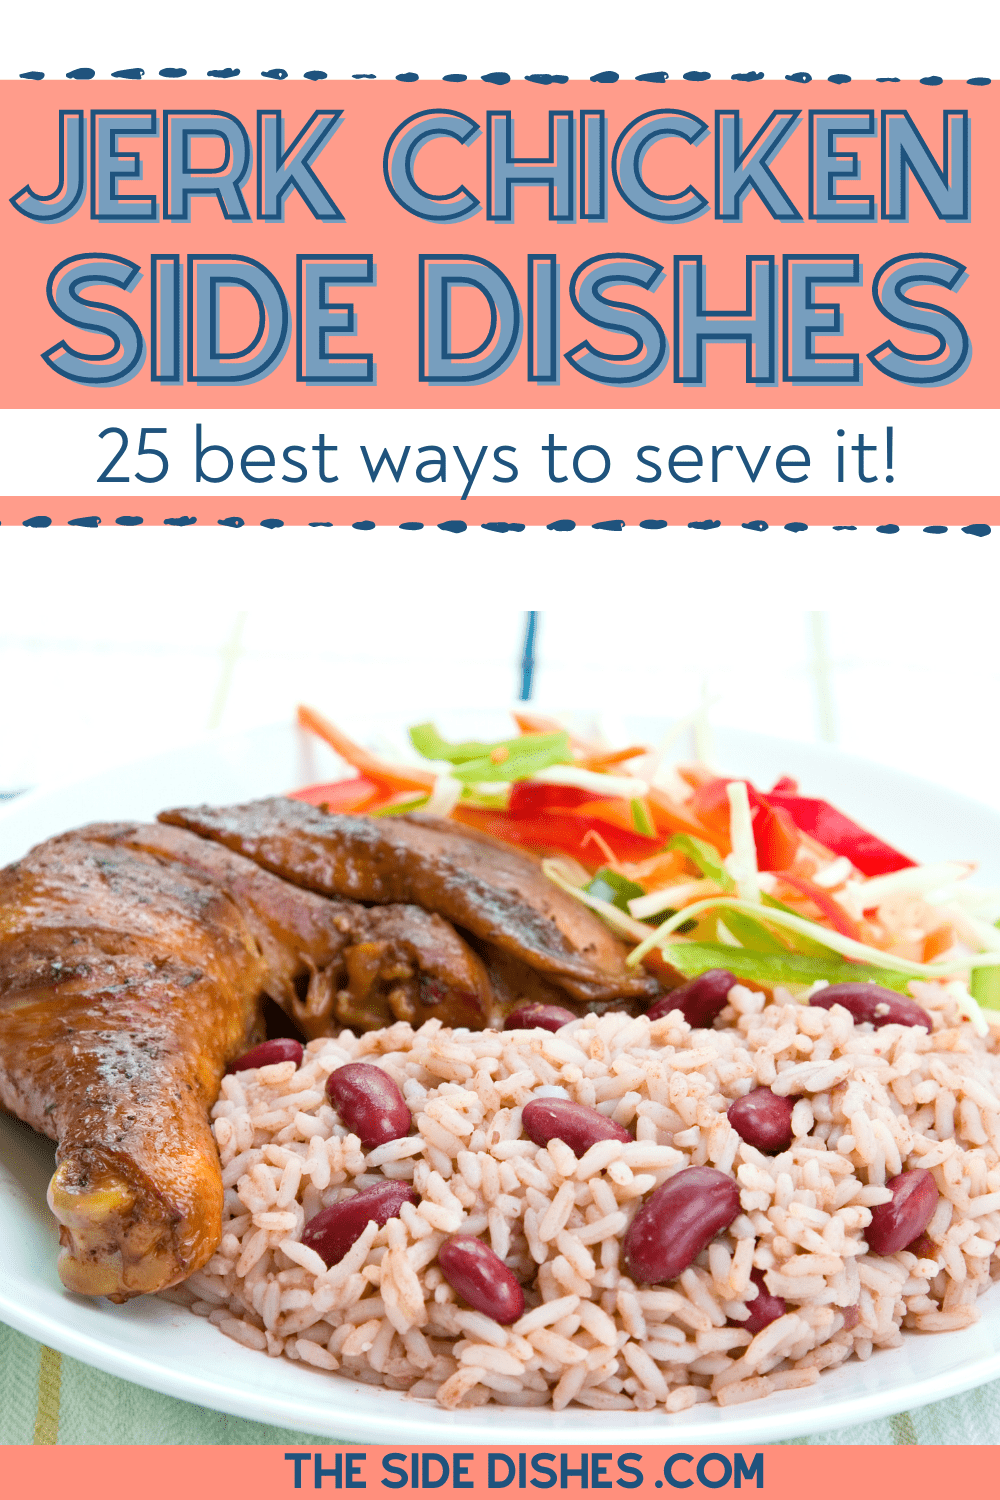 Exactly what to serve with jerk chicken! These delicious side dishes will make your flavorful chicken dinner complete!